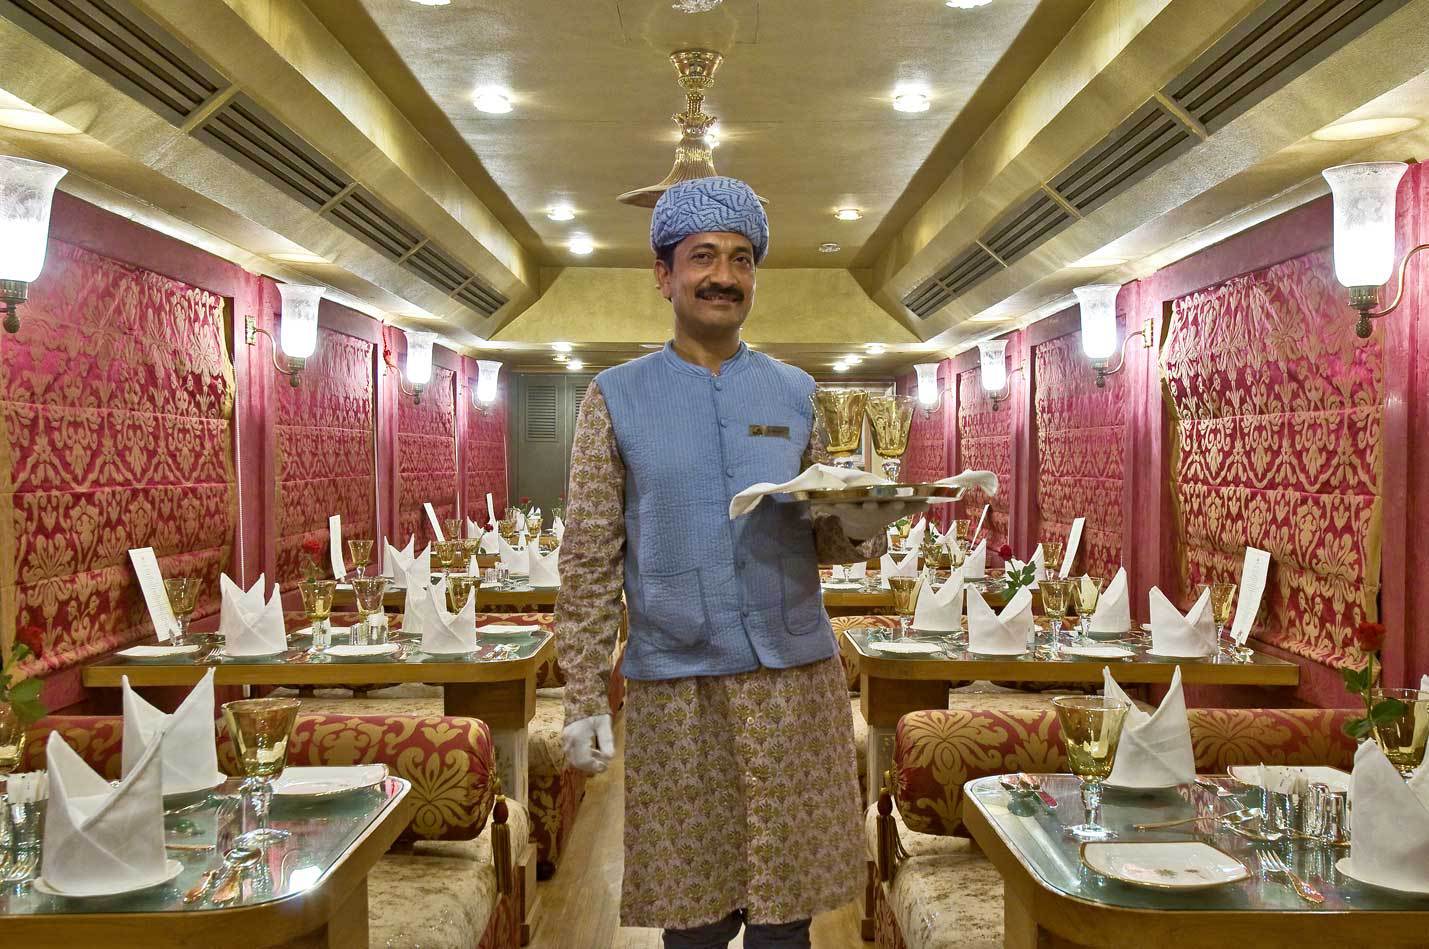 top 5 most luxurious trains in india, royal rajasthan on wheels fare , royal rajasthan on wheels route , royal rajasthan on wheels train ticket price in indian rupees , royal rajasthan on wheels review , itinerary of royal rajasthan on wheels , royal rajasthan on wheels train number , royal rajasthan on wheels train no , rajasthan royal train photos